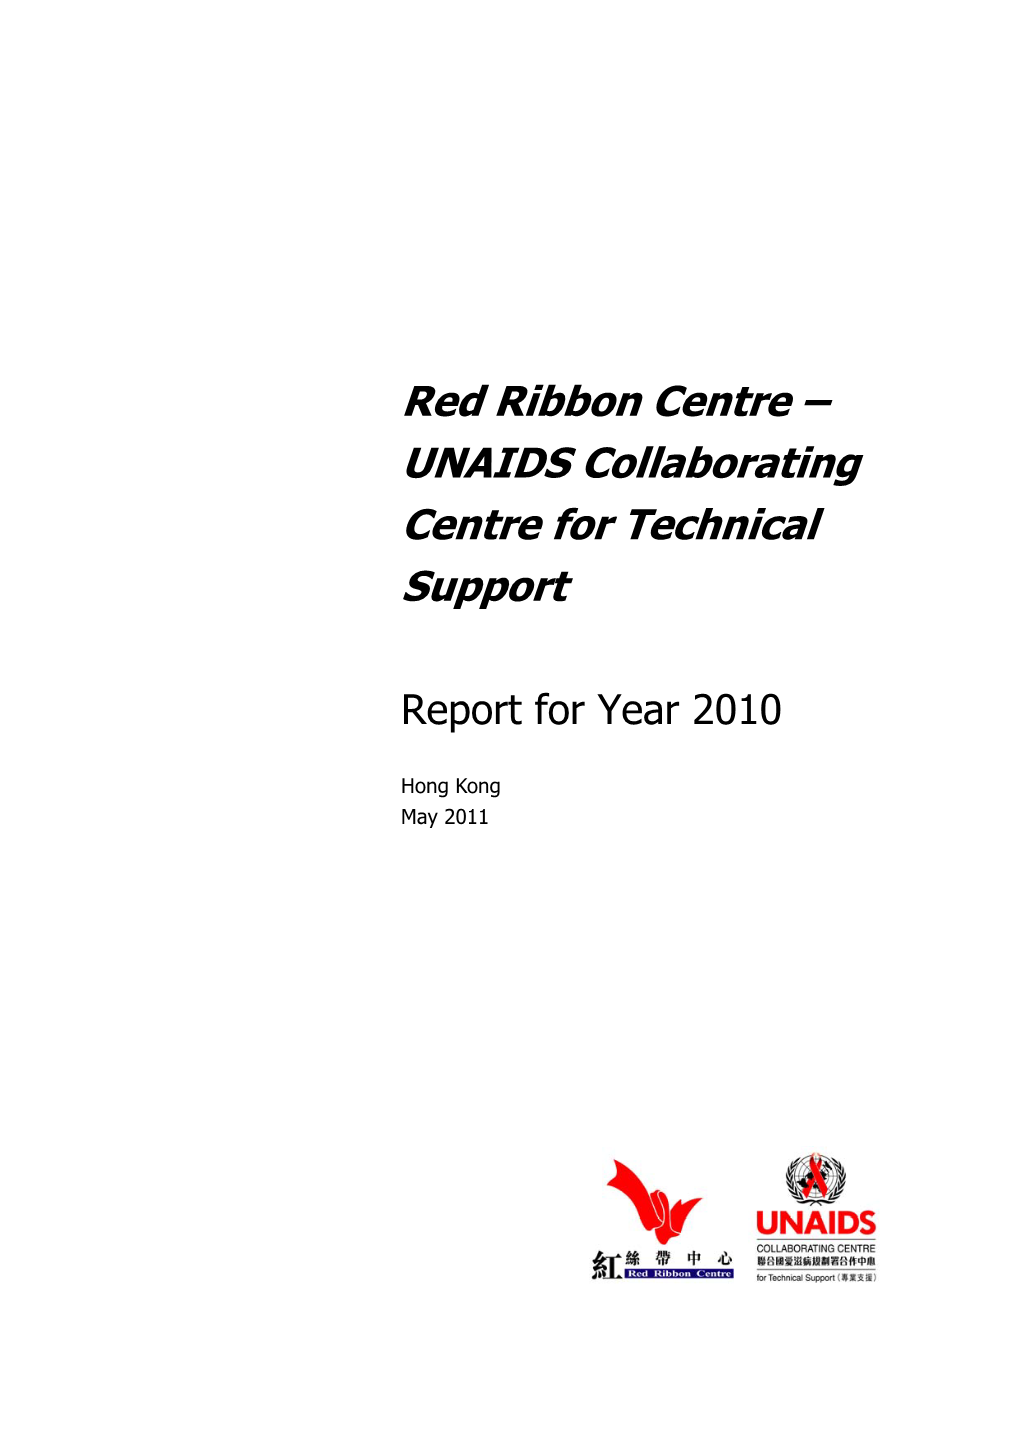 UNAIDS Collaborating Centre for Technical Support Report for Year 2010